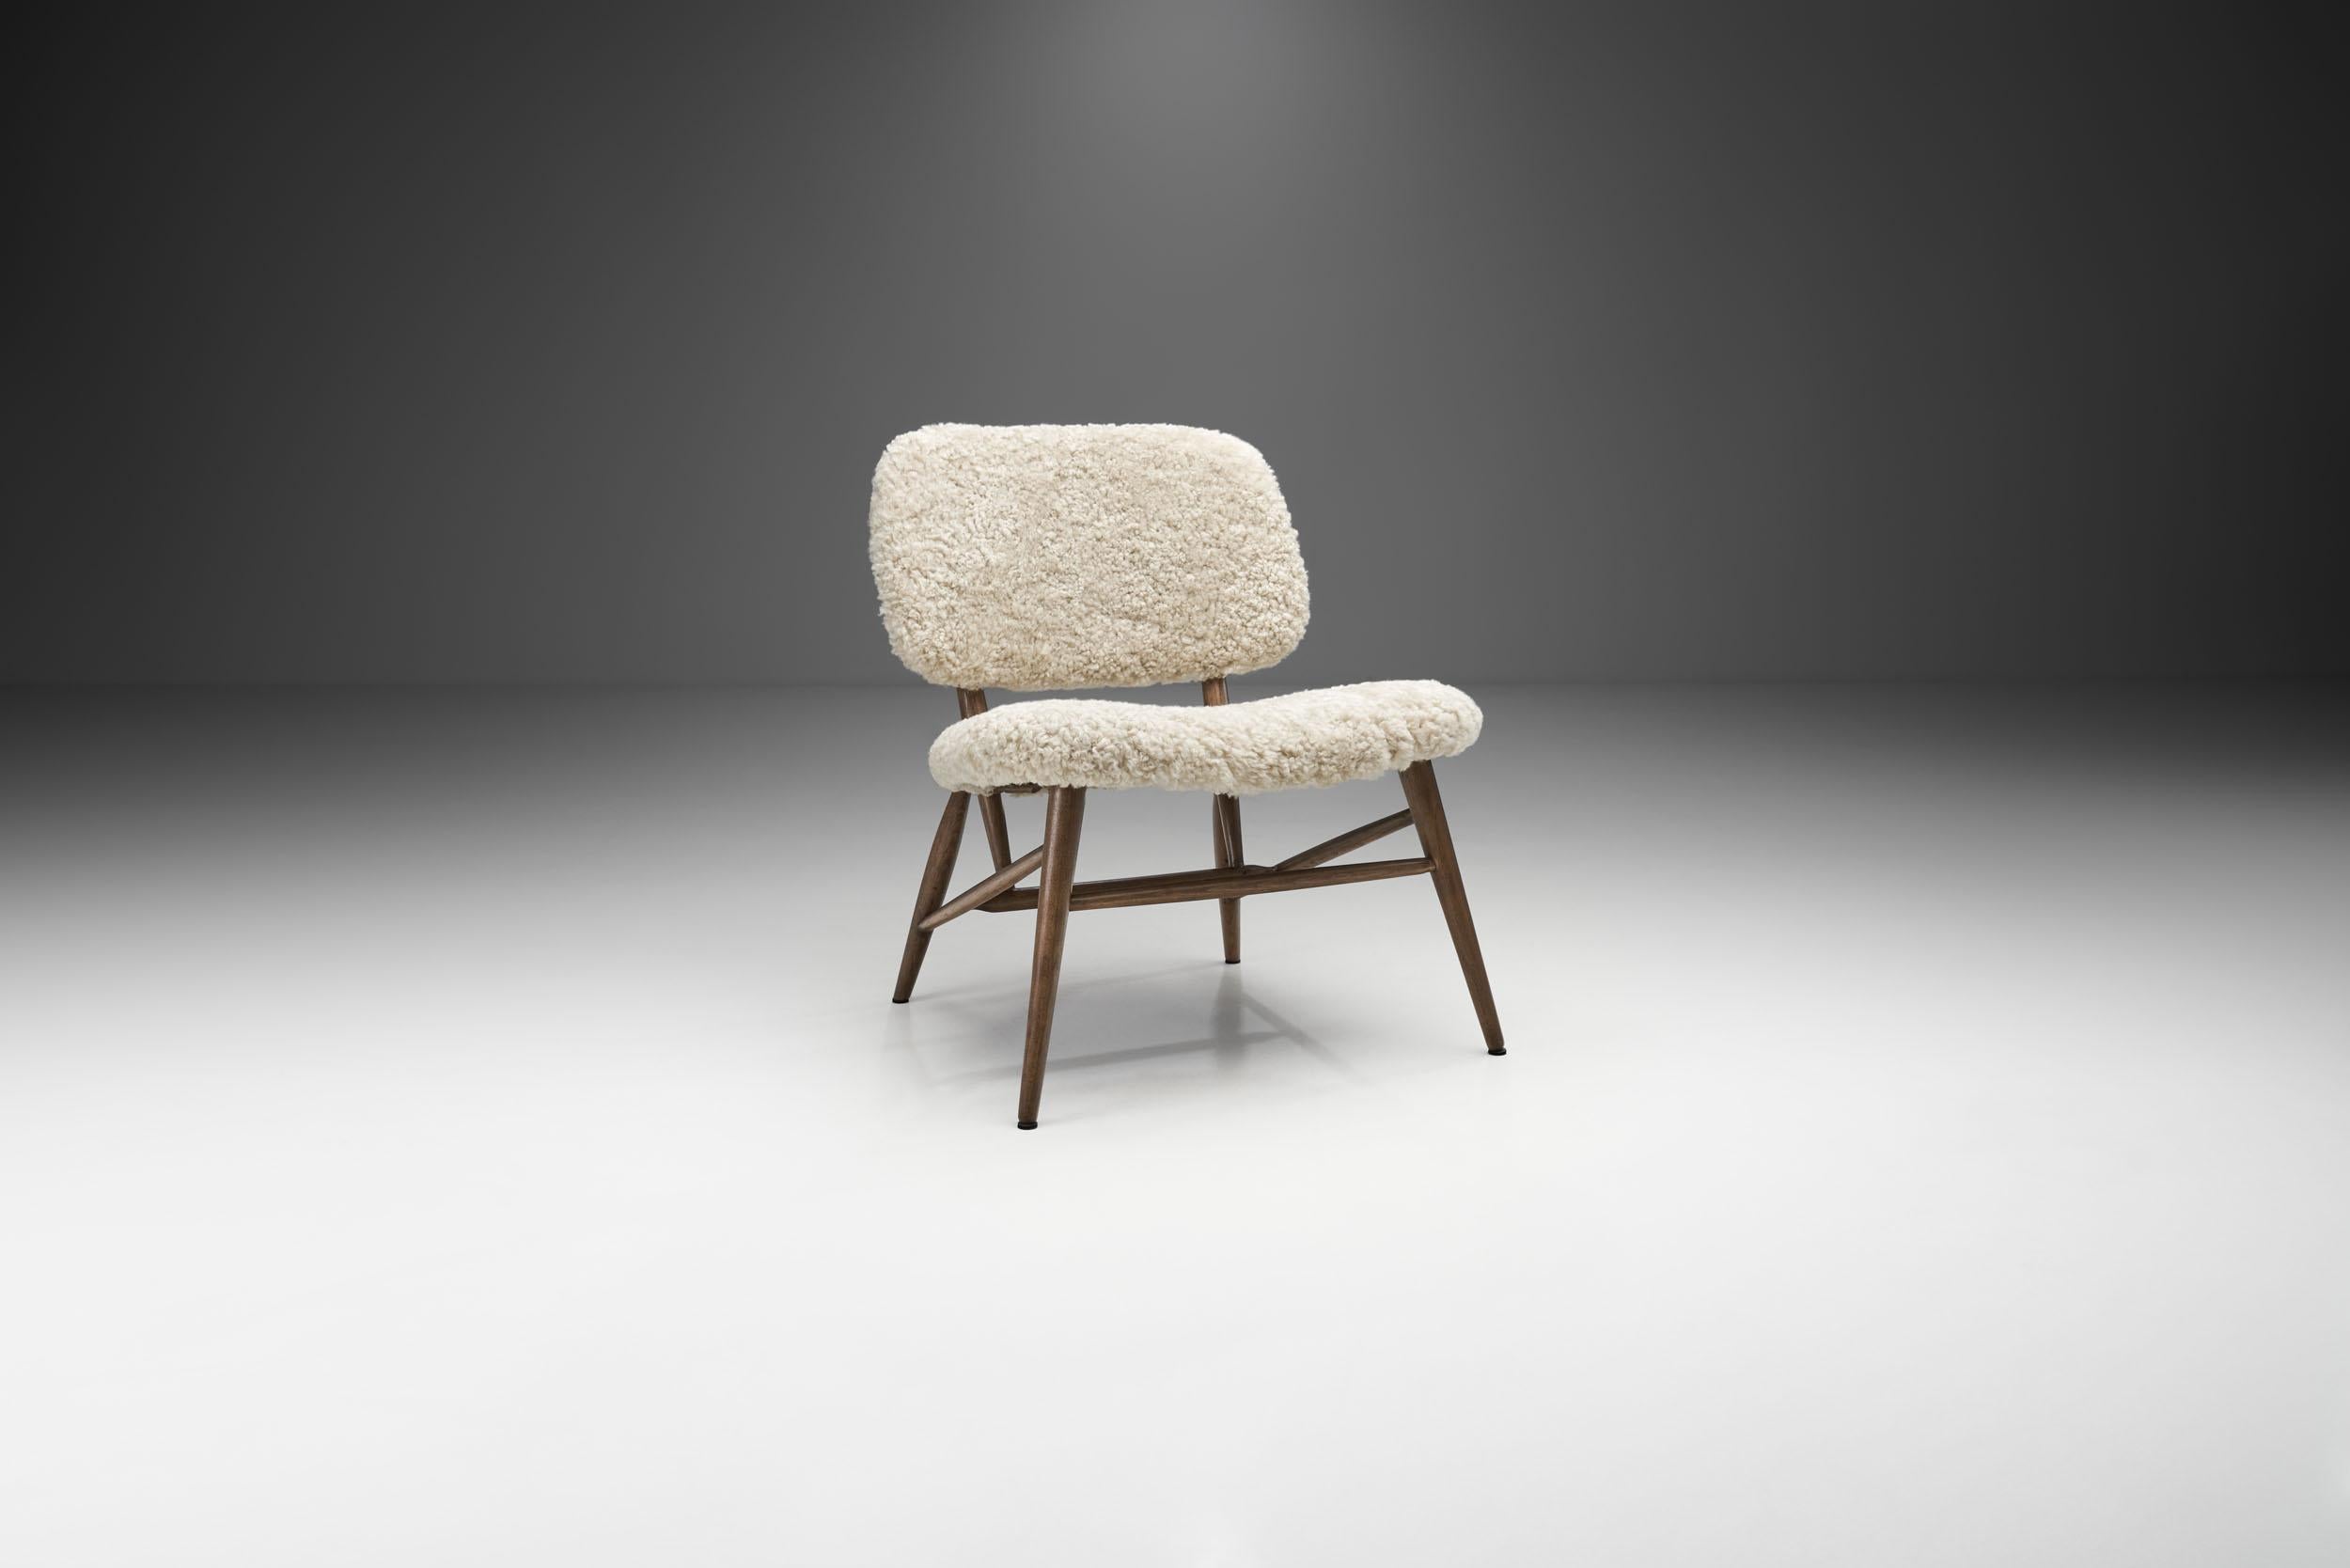 This beautiful Swedish chair is exemplary of Nordic Mid-Century Modern design as well as outstanding craftsmanship with a quality that honours the materials and their users. The main principles of Swedish Modernism centre around minimalism,